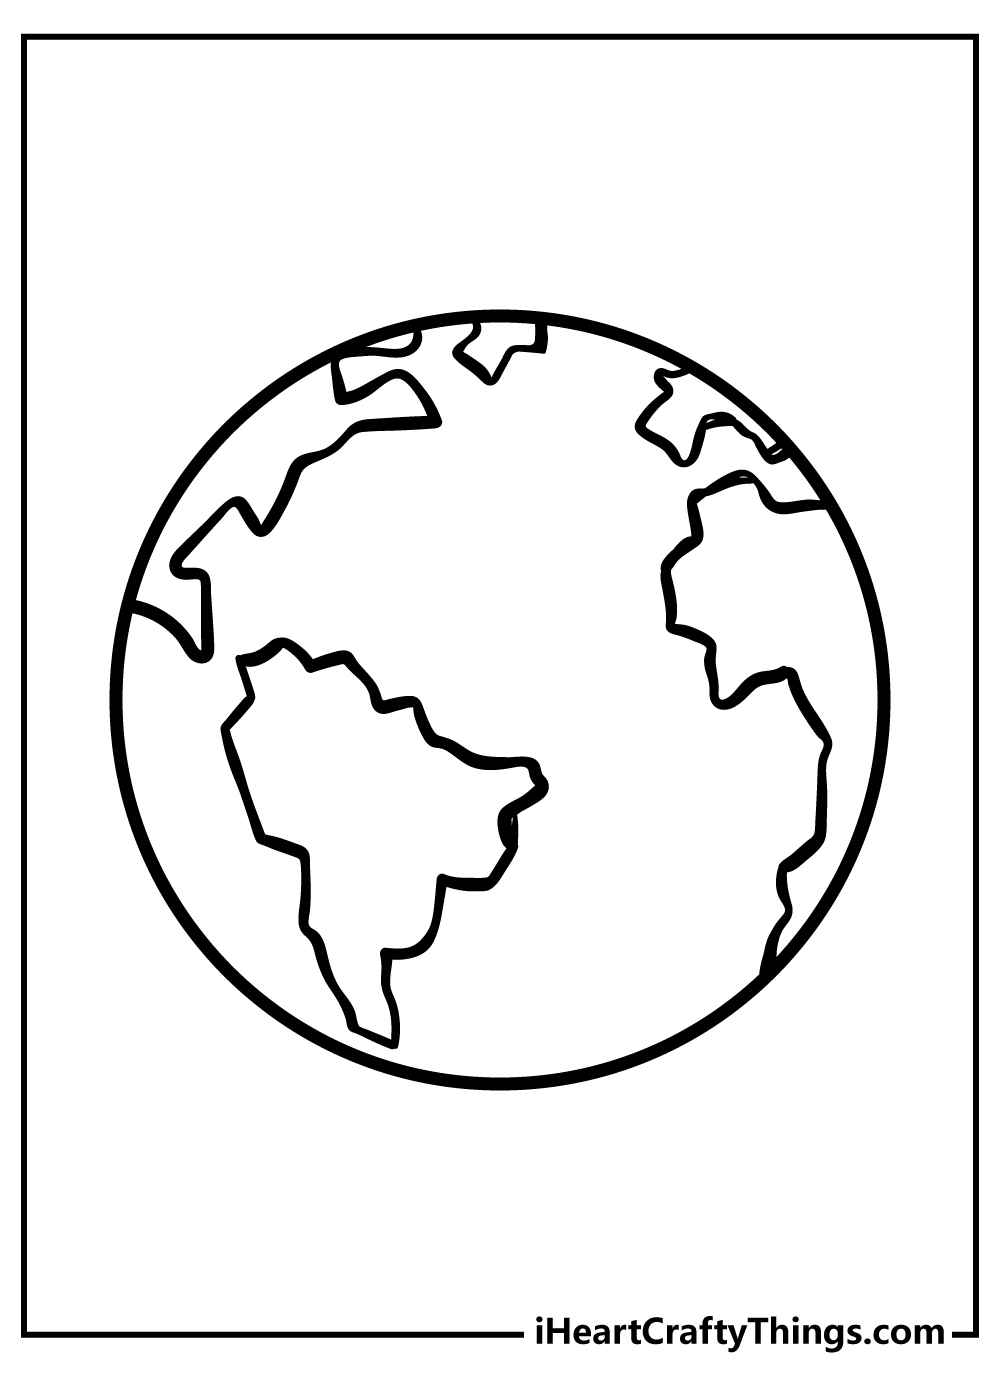 Earth Coloring Pages for preschoolers free printable